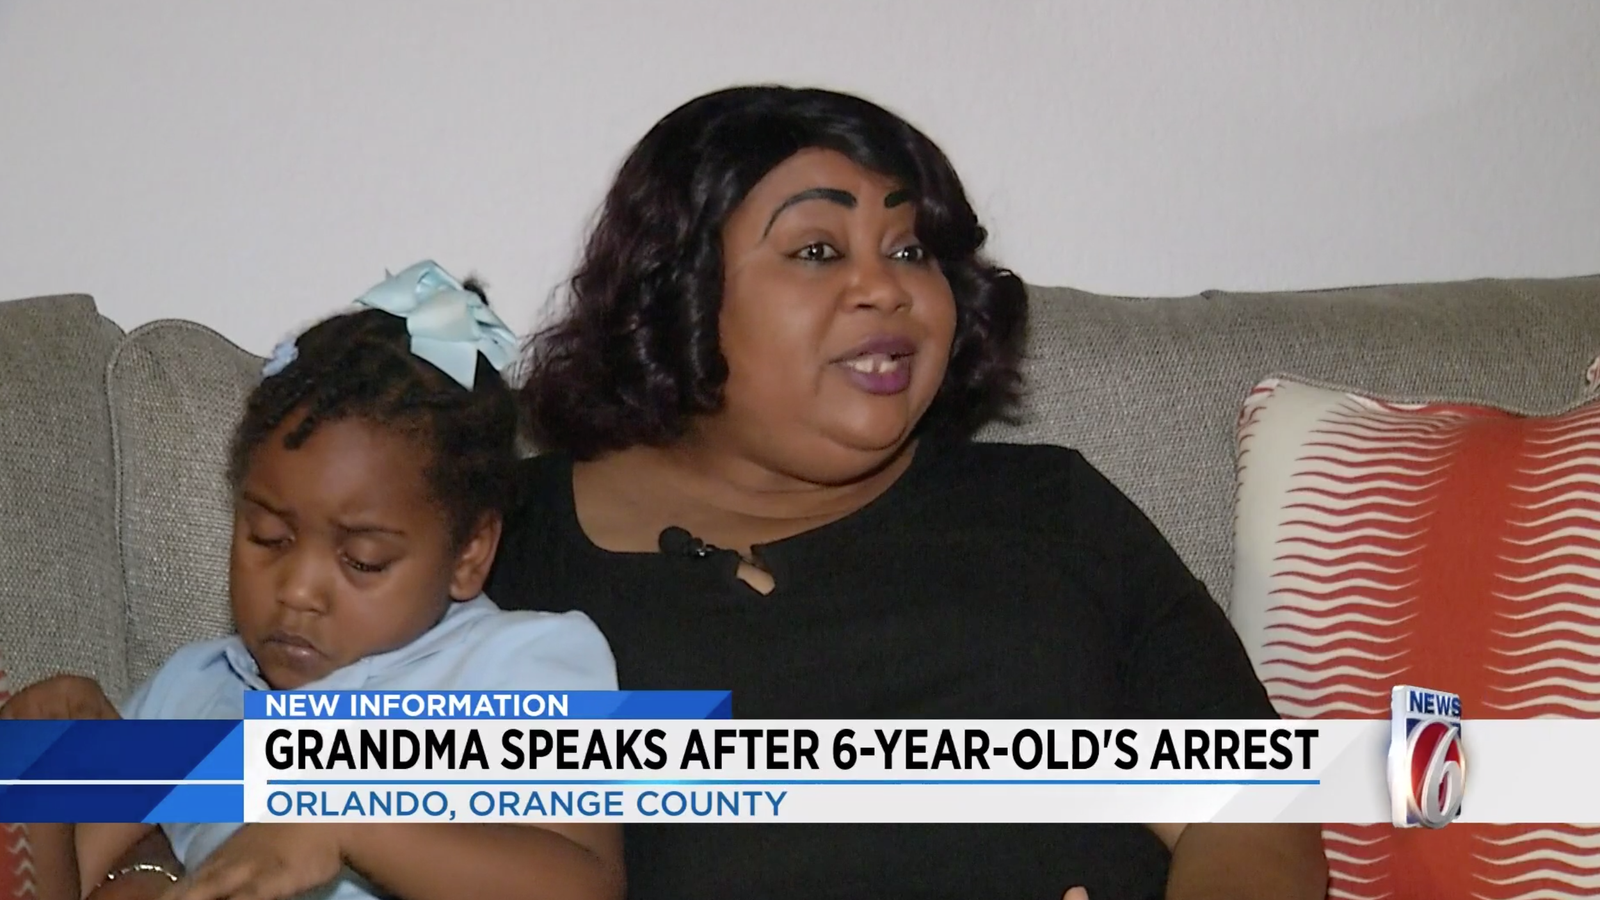 Florida Officer Under Investigation for Arresting and Charging 6-Year-Old Girl for Throwing a Tantrum